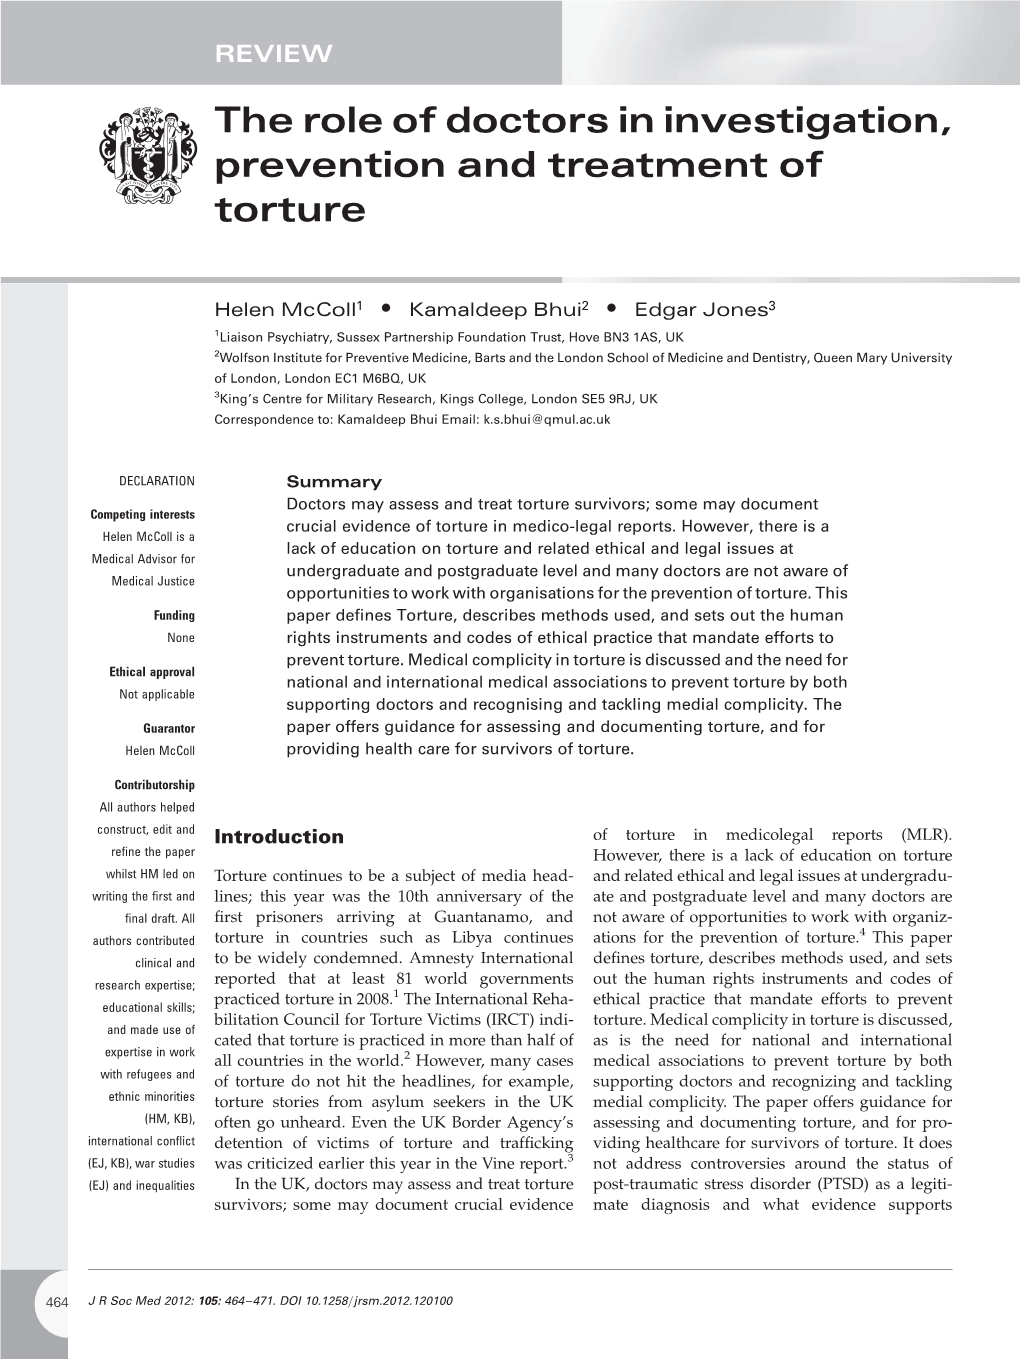 The Role of Doctors in Investigation, Prevention and Treatment of Torture